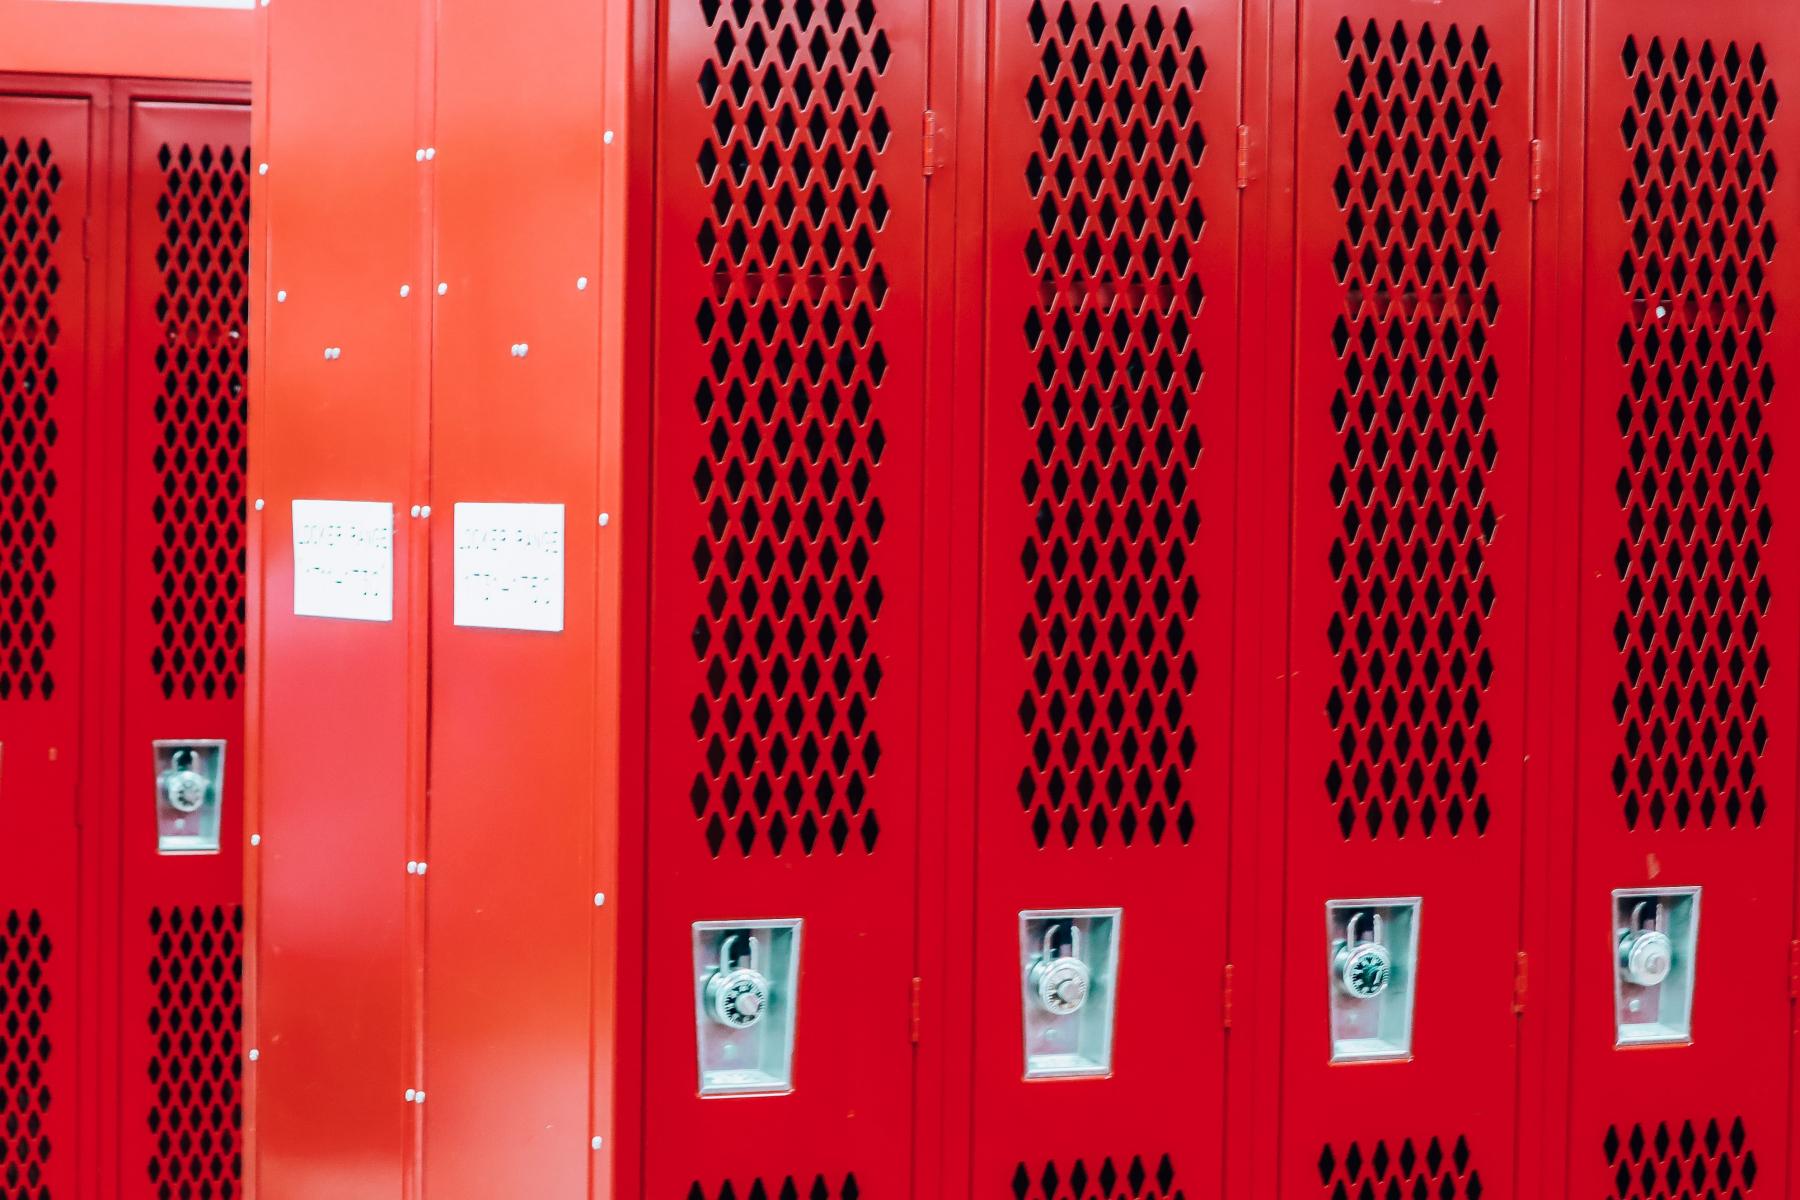 A row of lockers inside one of the locker rooms